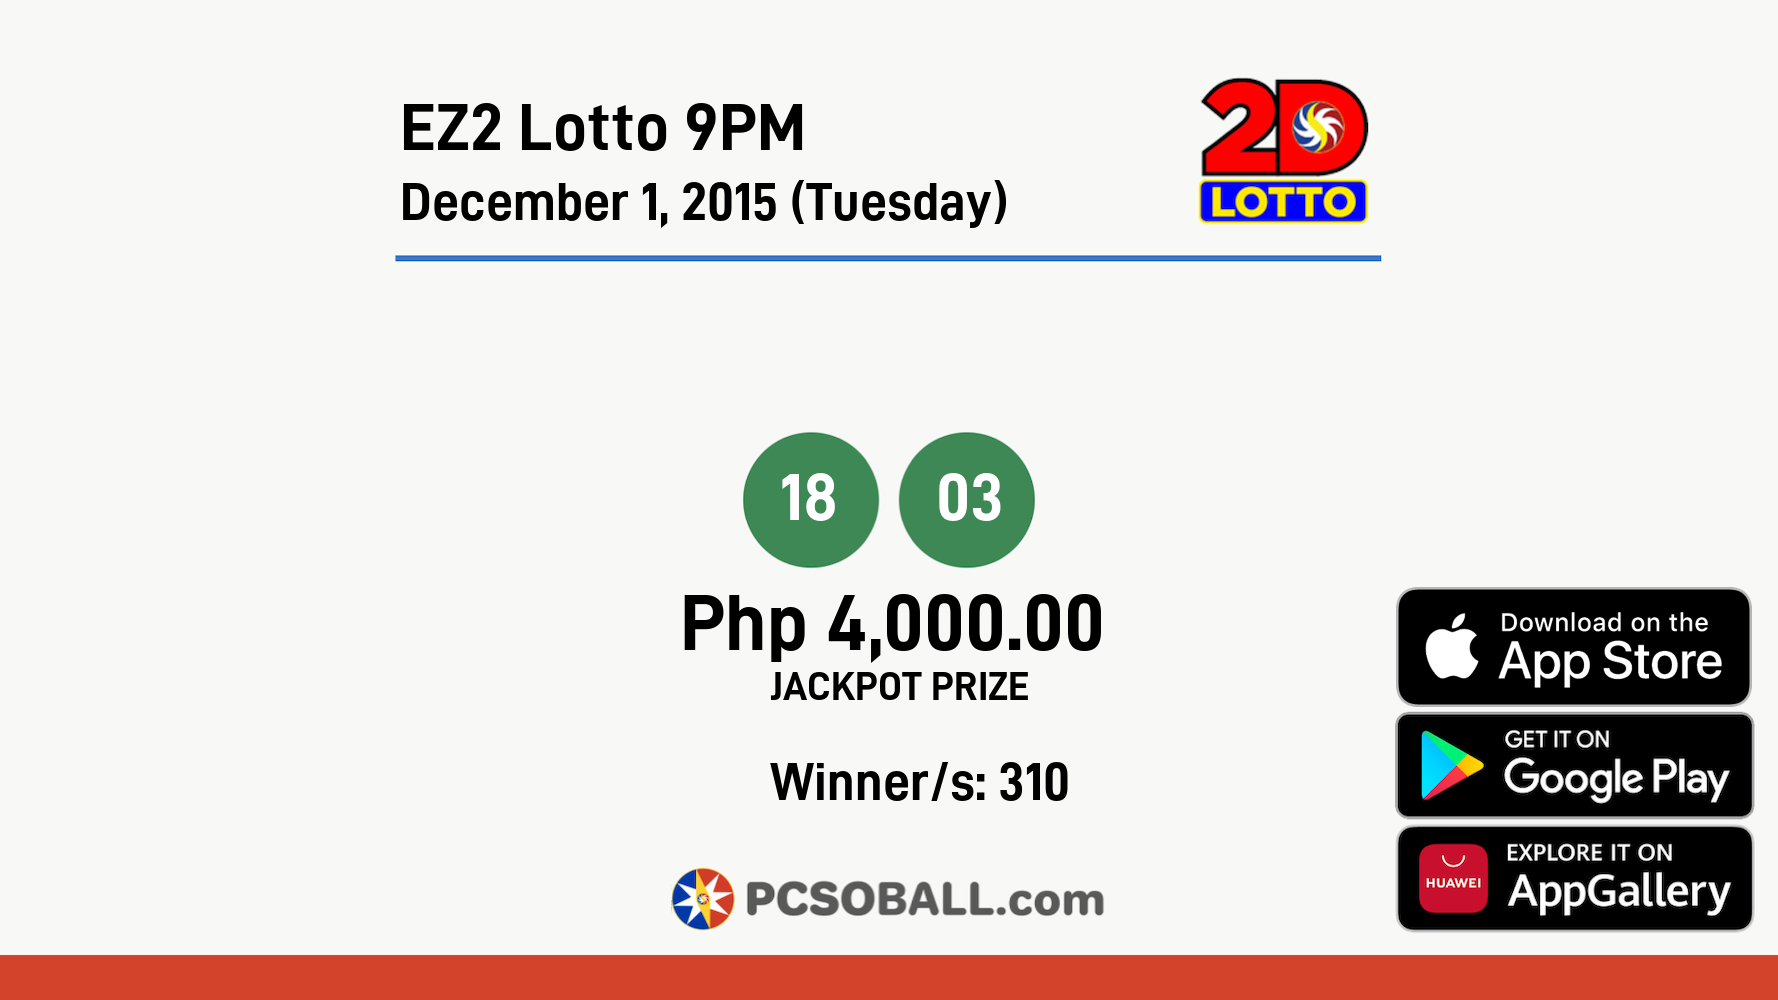 EZ2 Lotto 9PM December 1, 2015 (Tuesday) Result